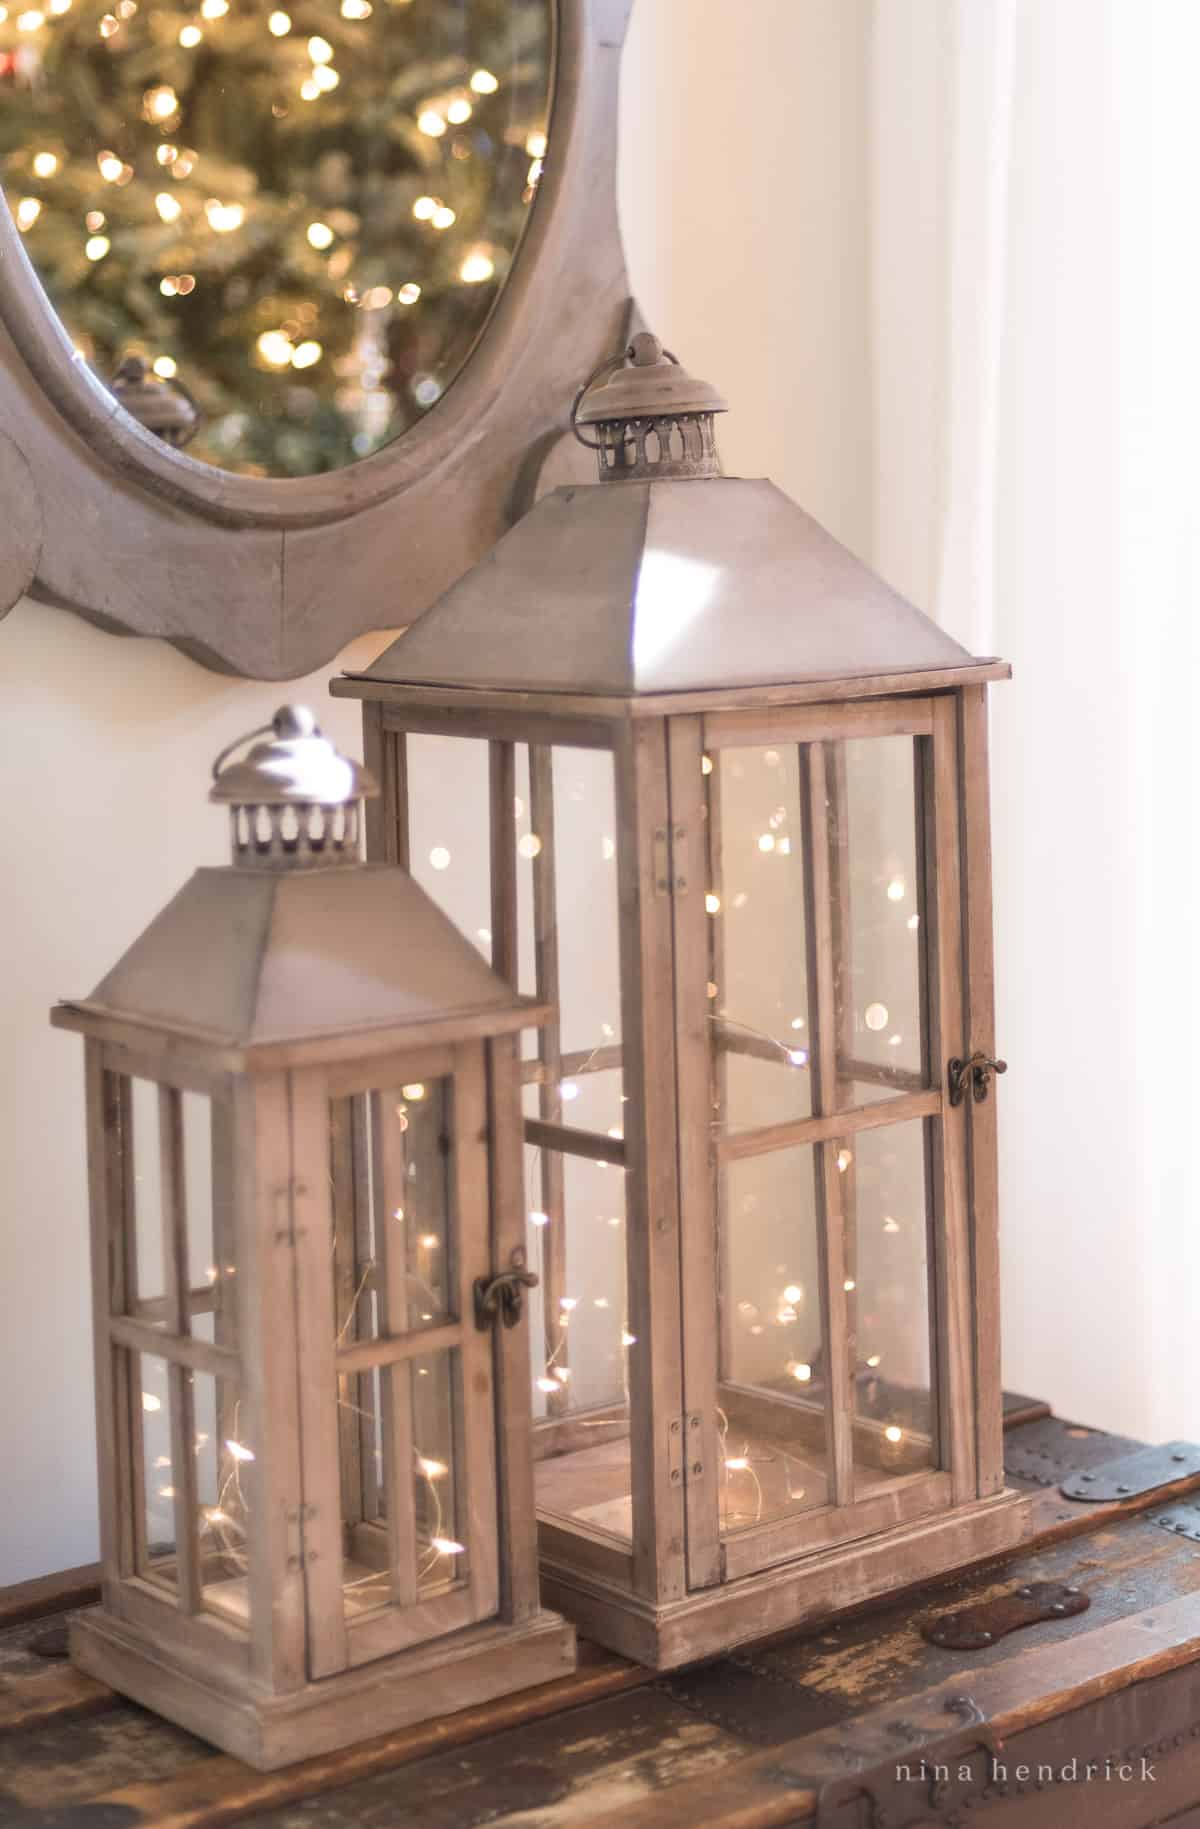 Rustic Lanterns with LED lights sparkling inside in front of a mirror